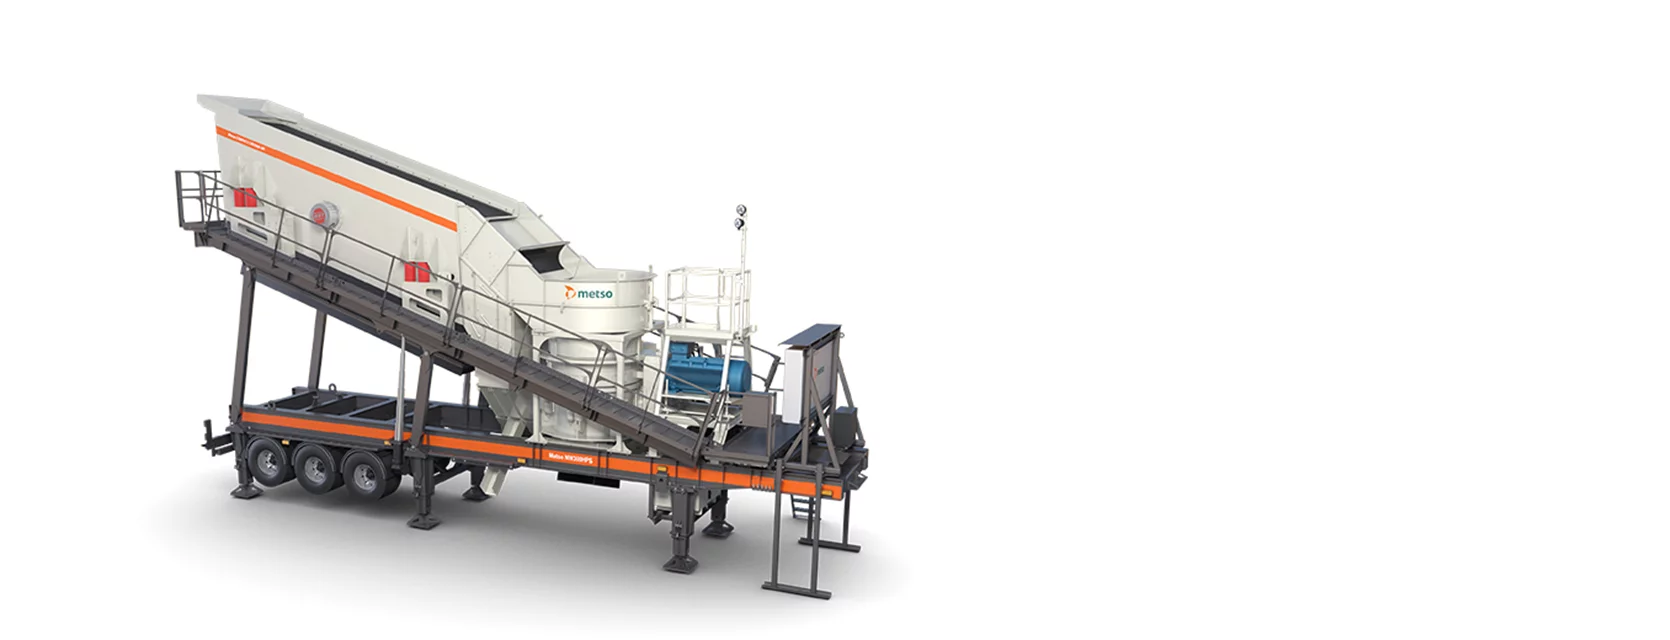 2020-01-09-21.23.57nw300hps-rapid-portable-cone-crusher-plant.webp